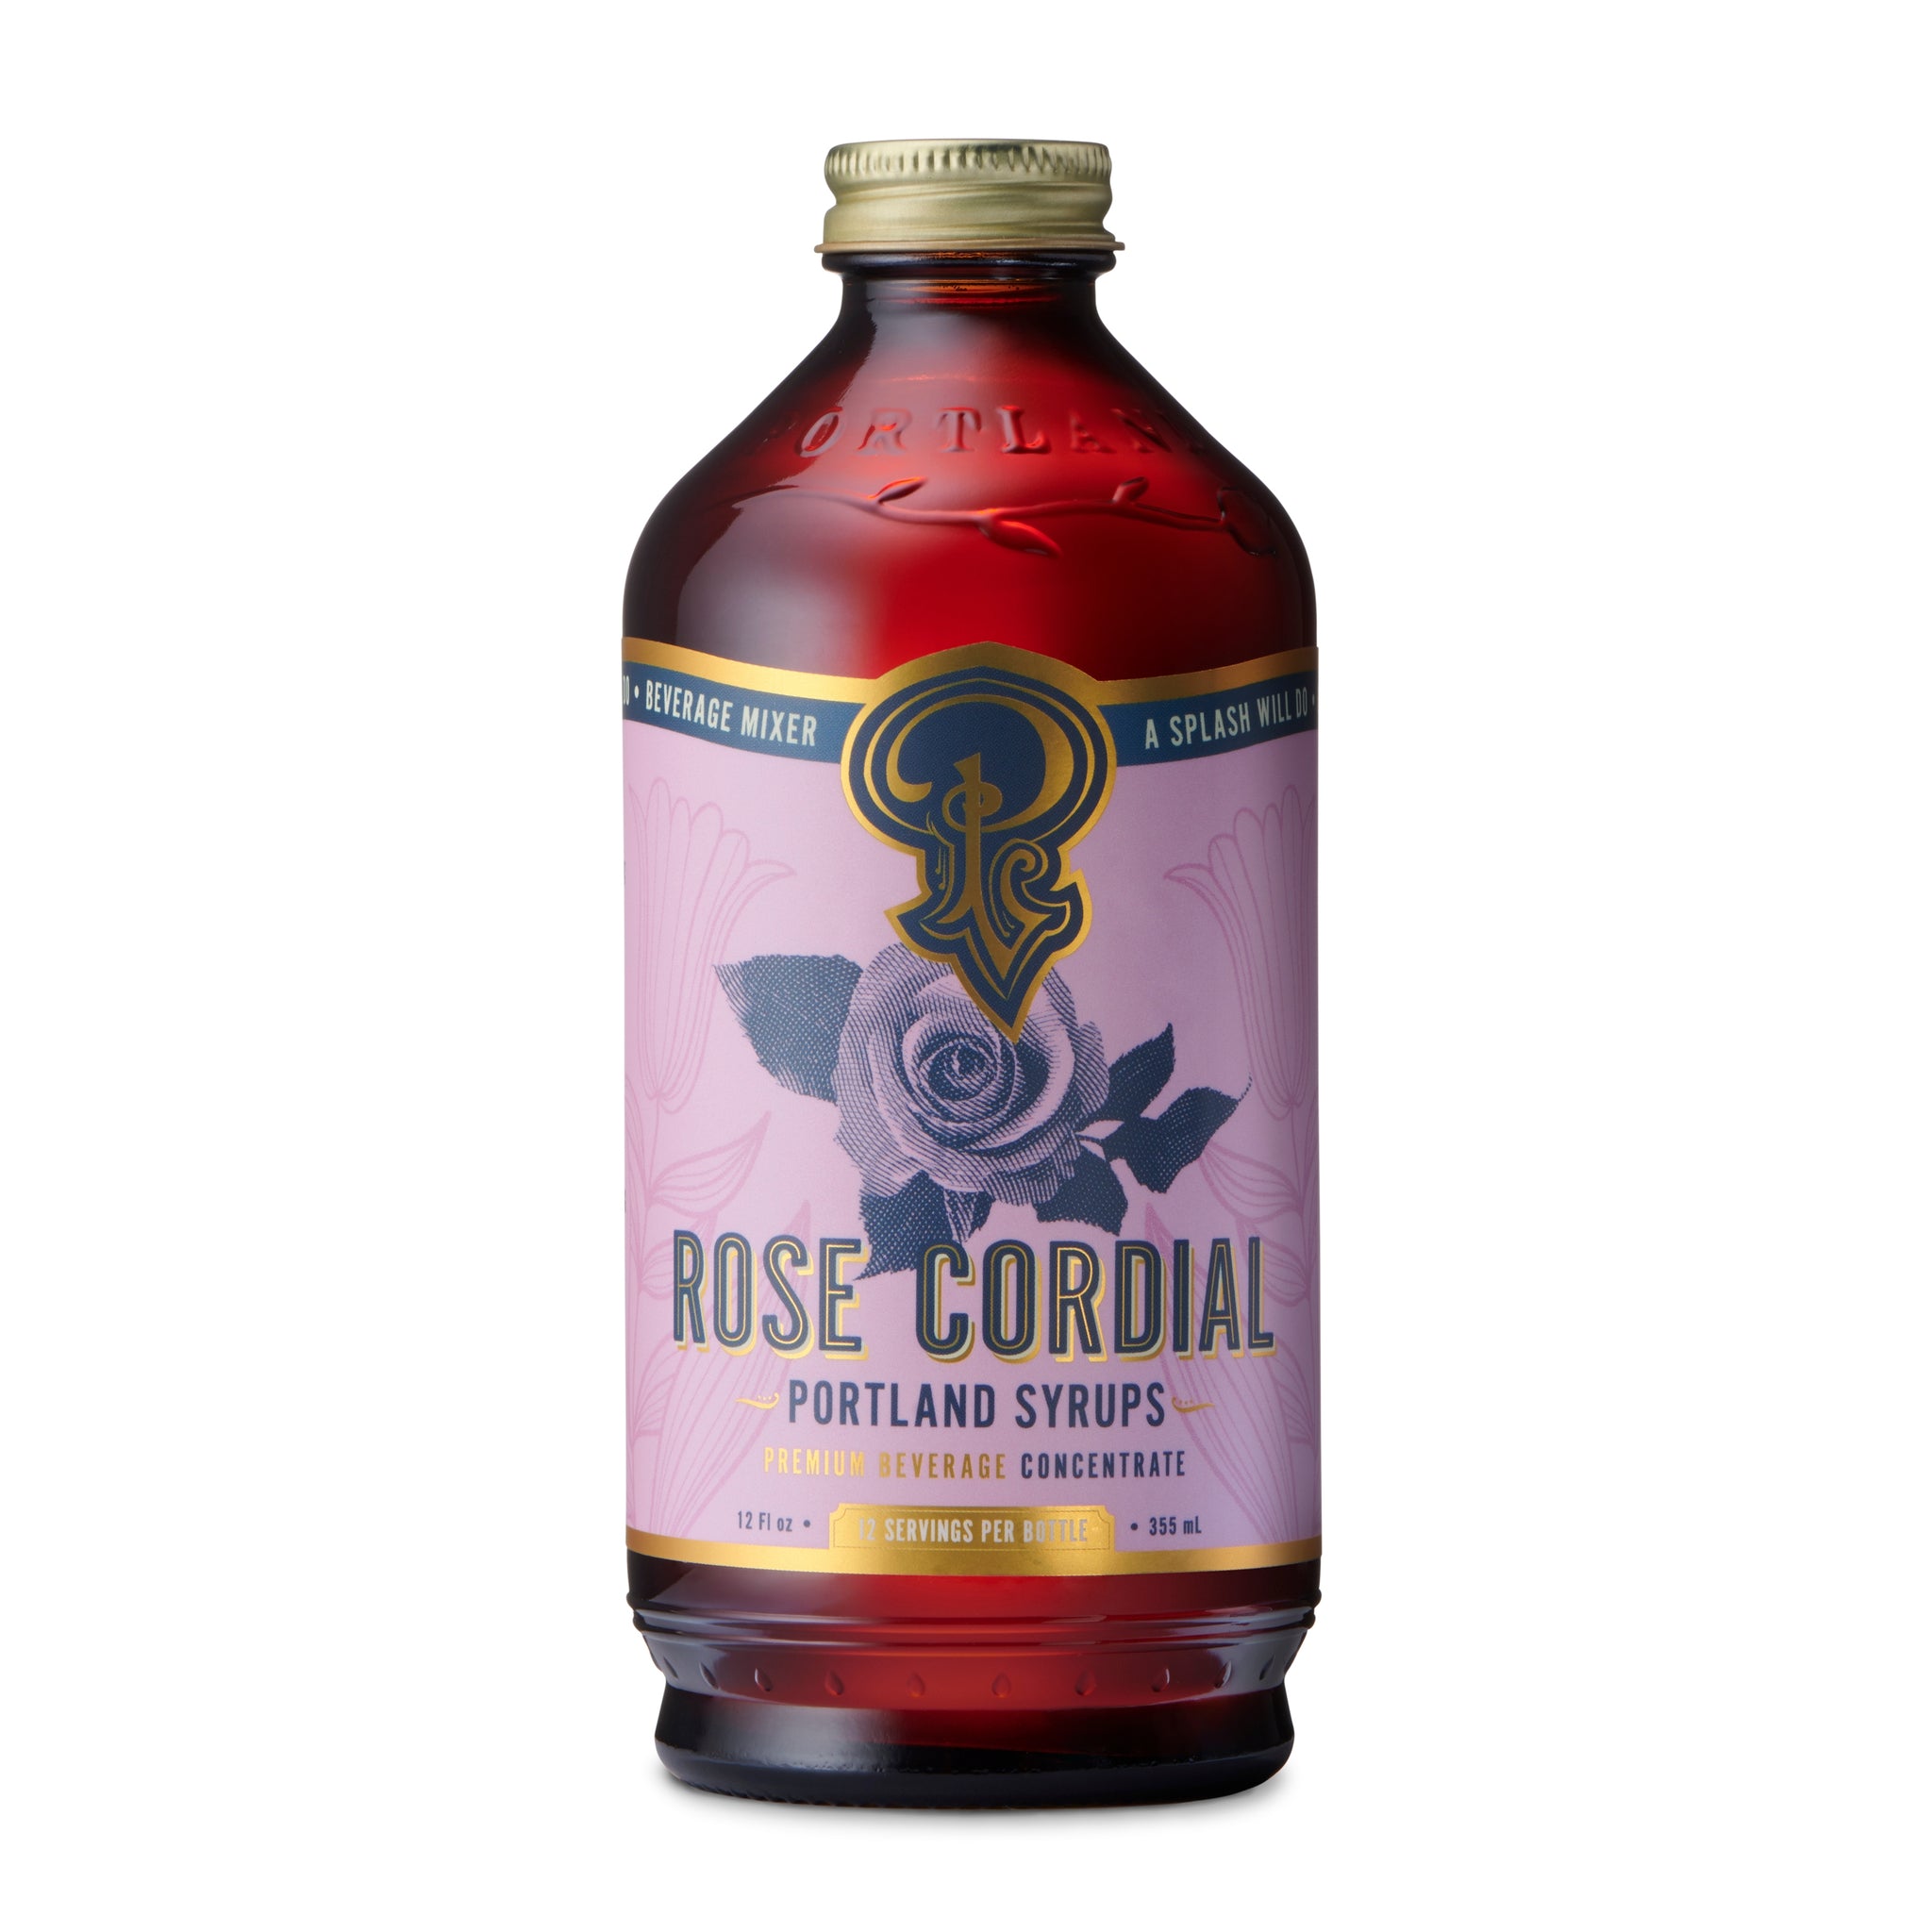 Portland Syrups | Rose Cordial Syrup